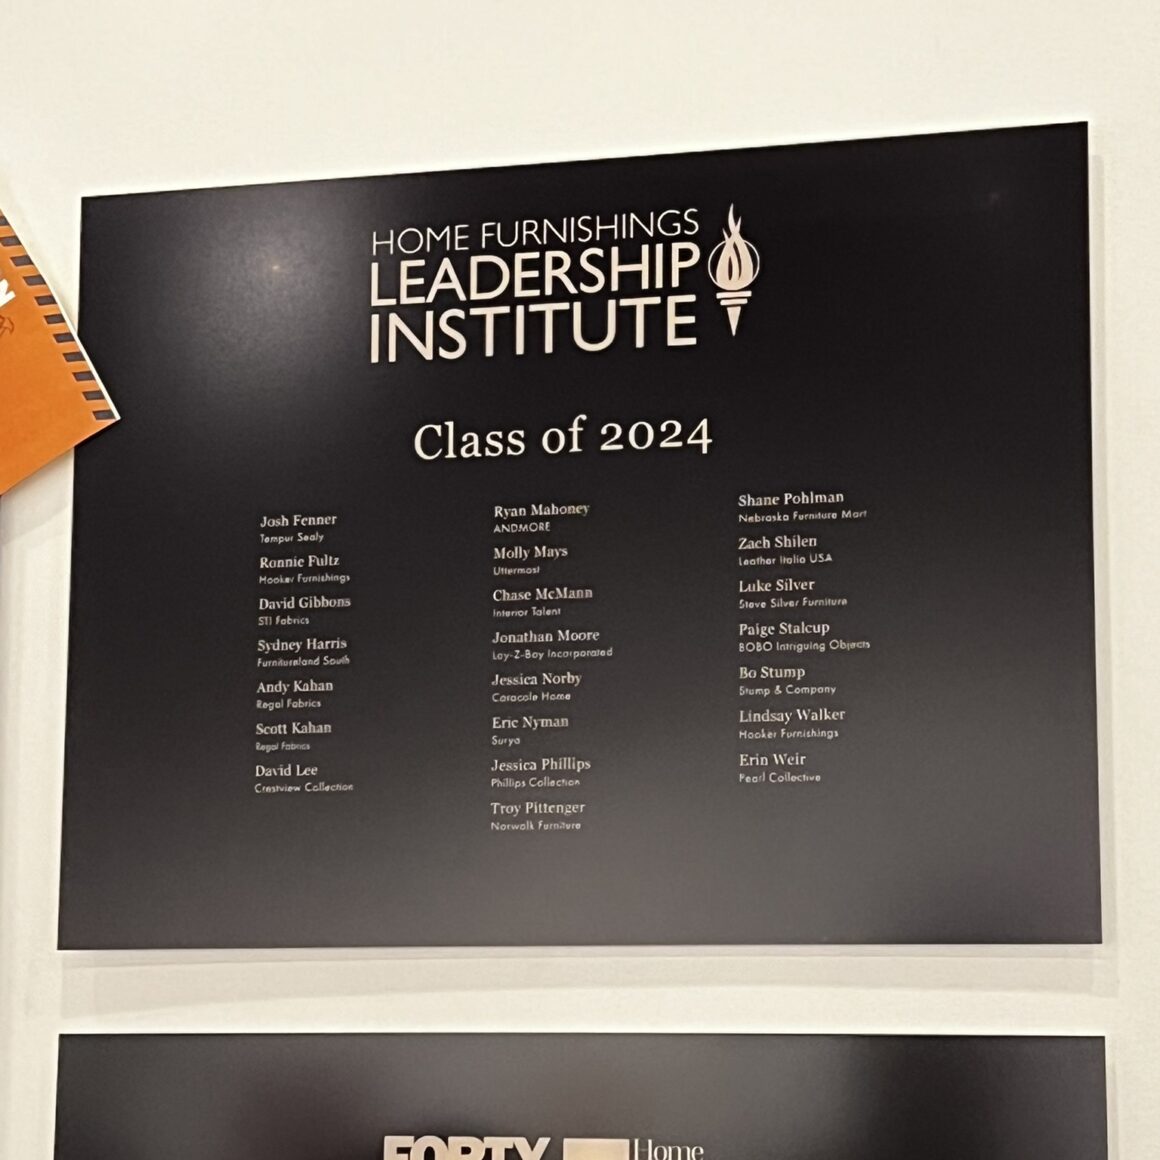 Chase on the board for leadership institute 1